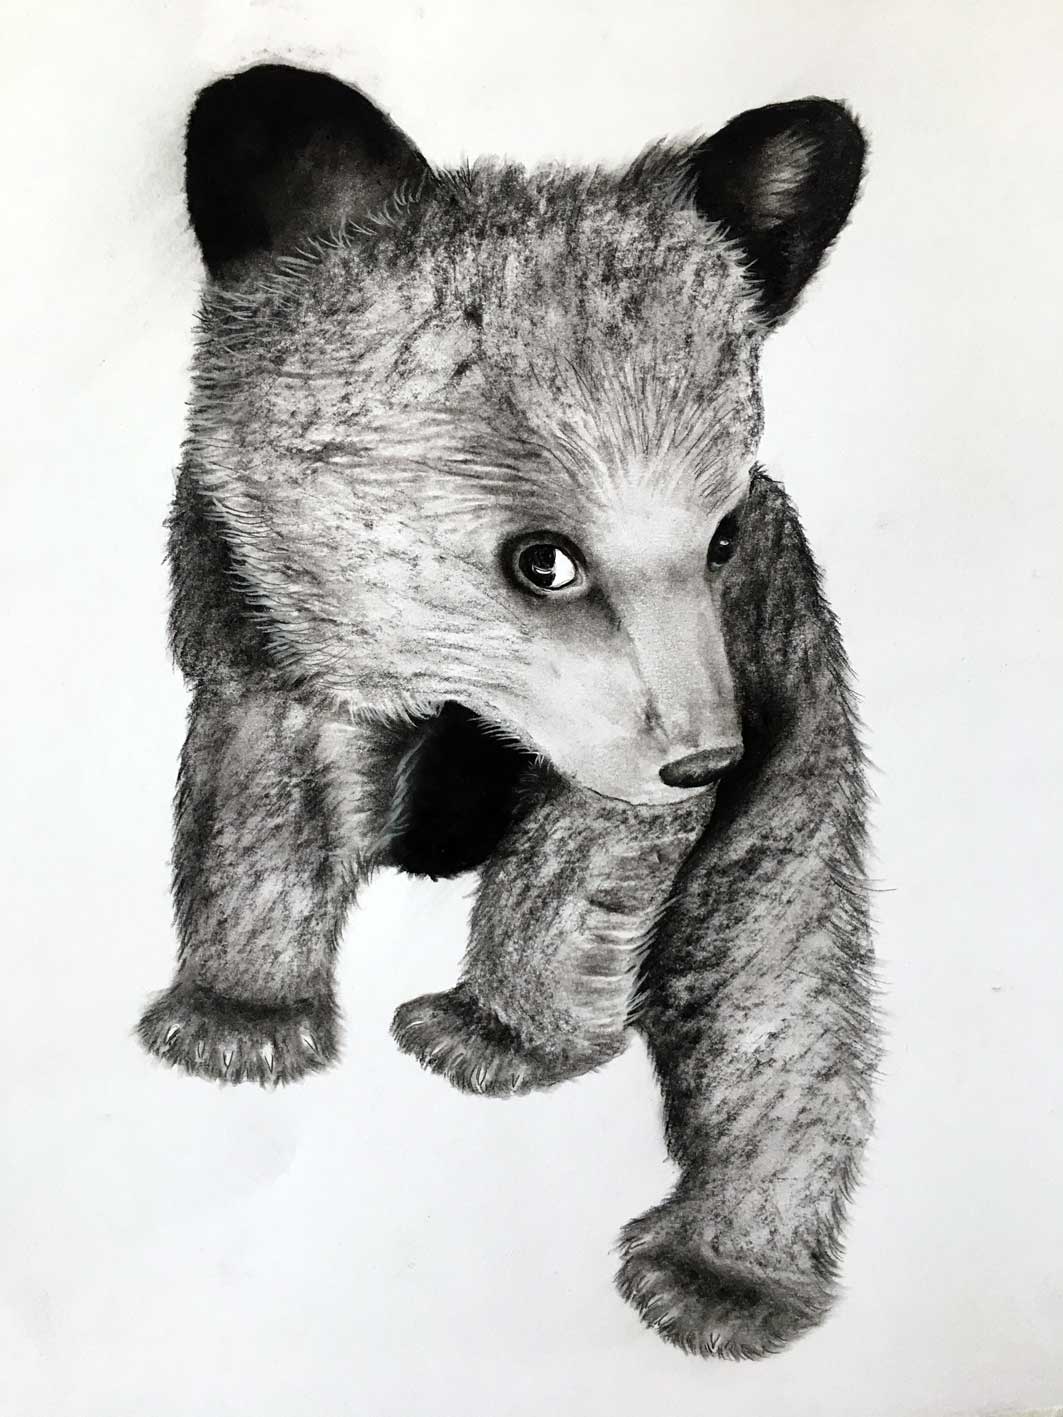 BEAR-CUB-2 bear-cub Thierry Bisch Contemporary painter animals painting art  nature biodiversity conservation 